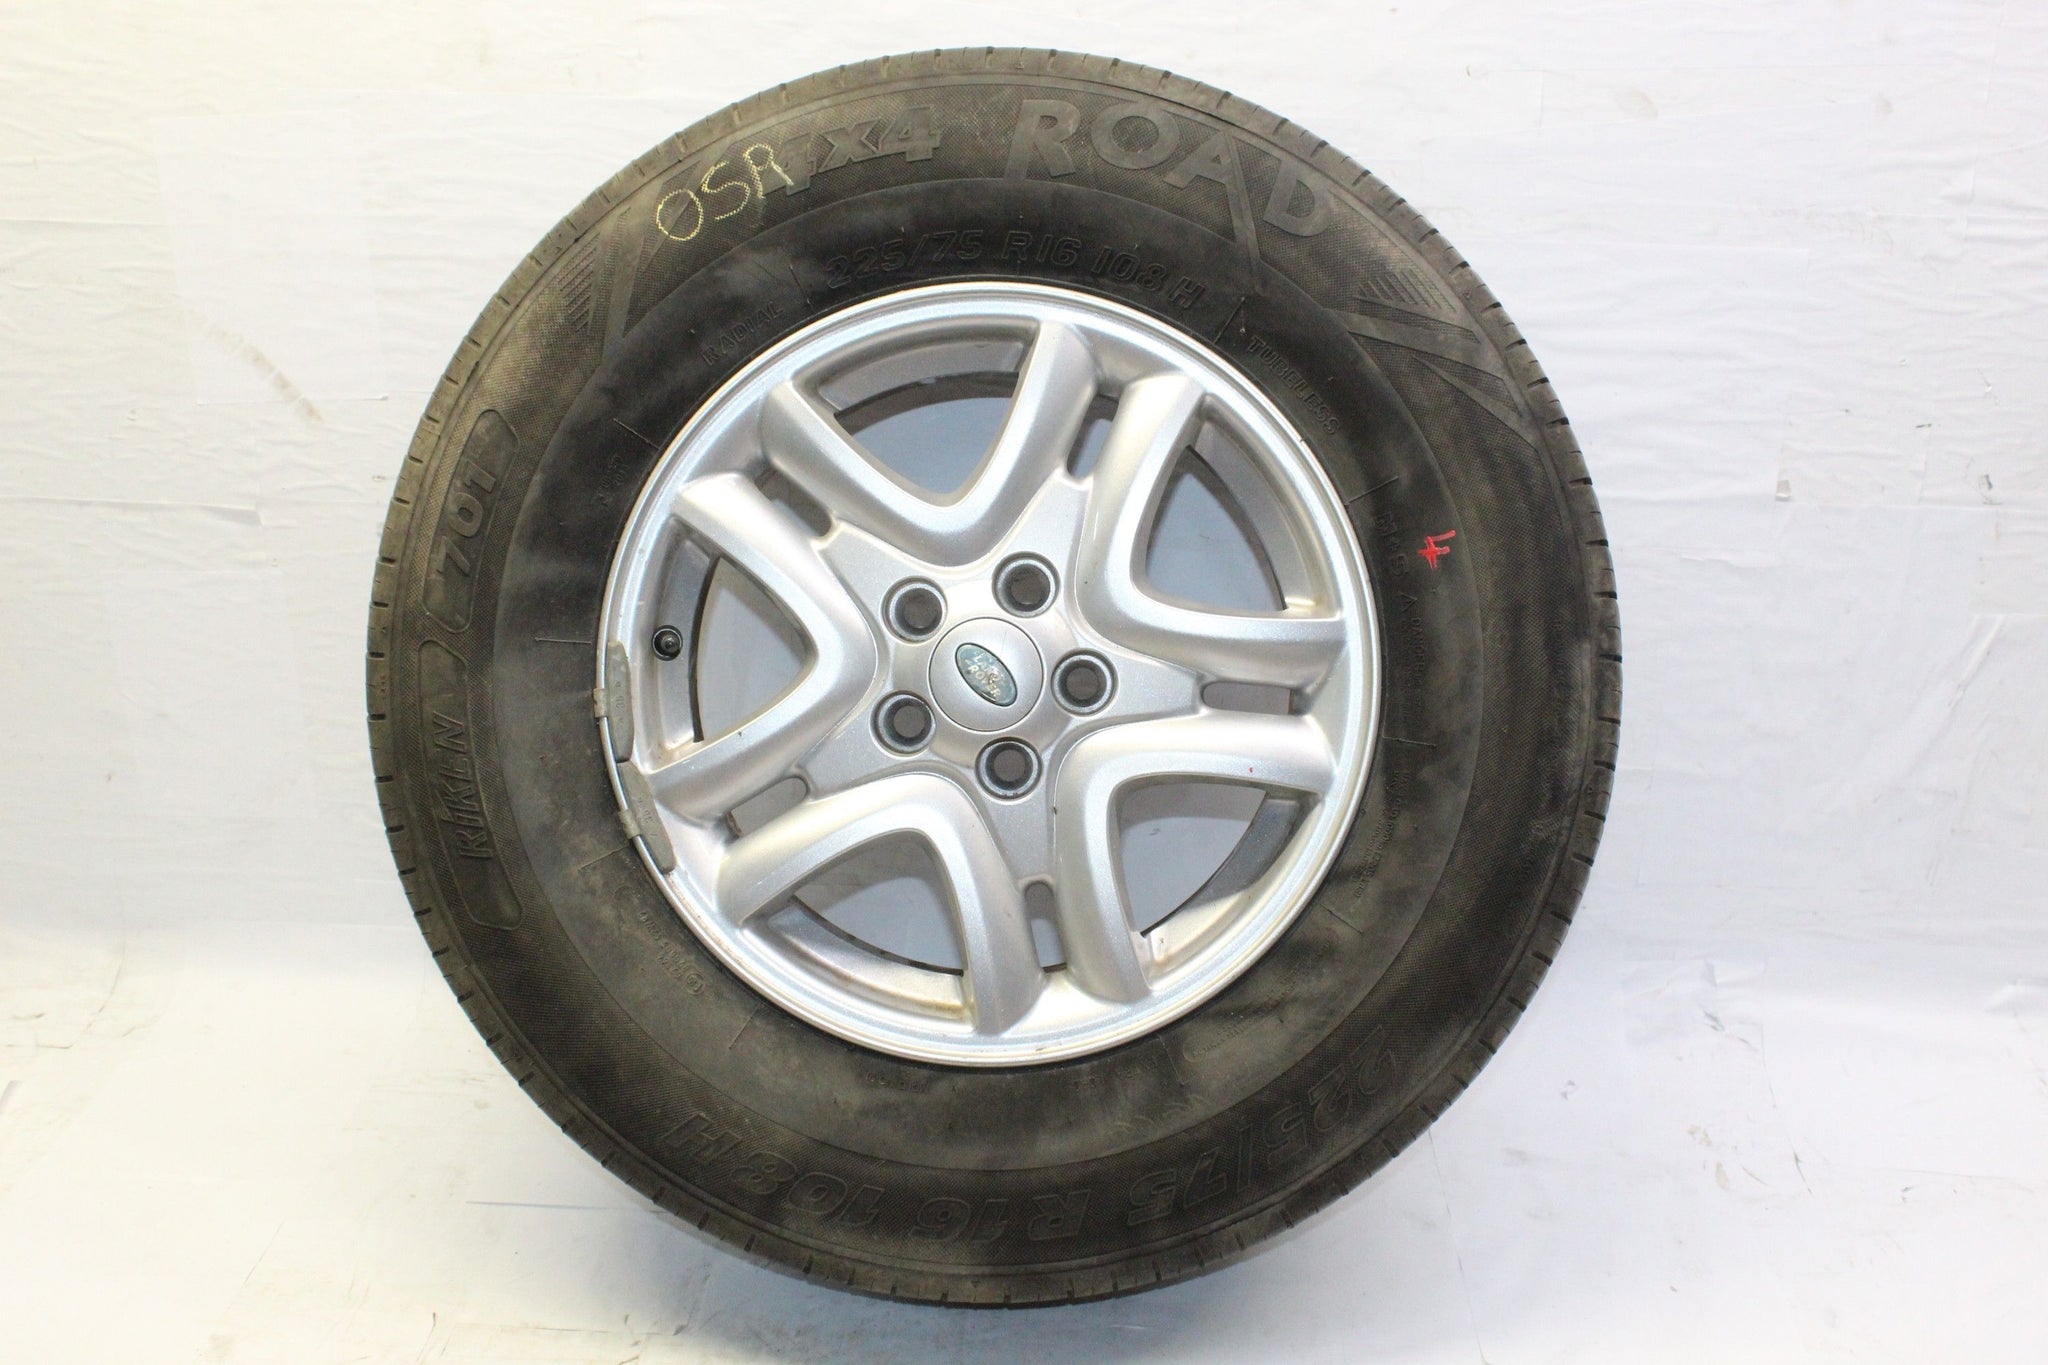 2007 Land Rover Freelander 2 ALLOY WHEEL WITH TYRE 225 / 75 R16 7.3MM